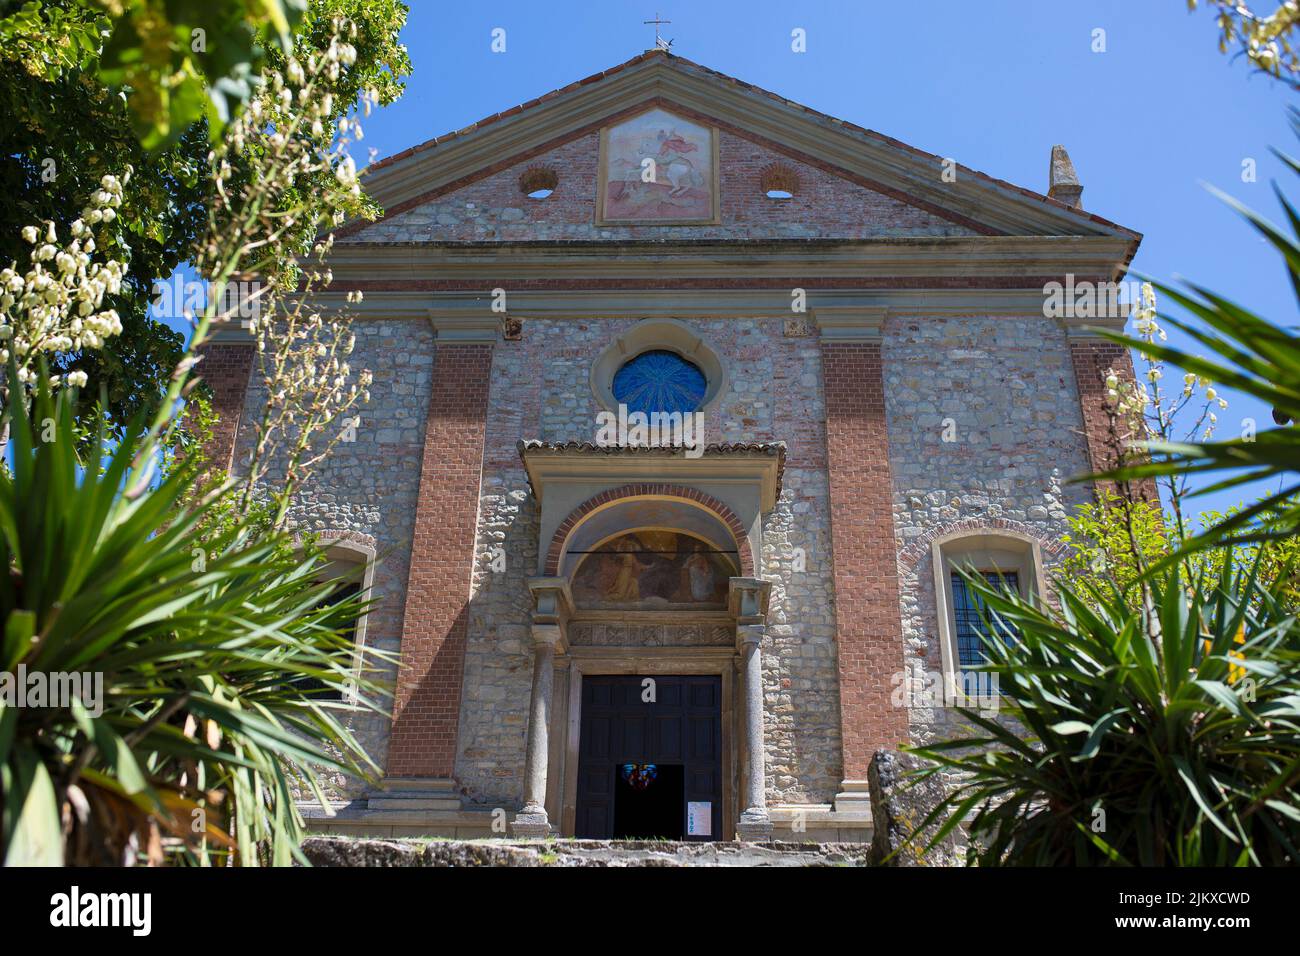 The facade of Santa Maria and San Giorgio church in Fortunago, one of the most charming villages of Oltrepò Pavese, Lombardia countryside, Italy. Stock Photo